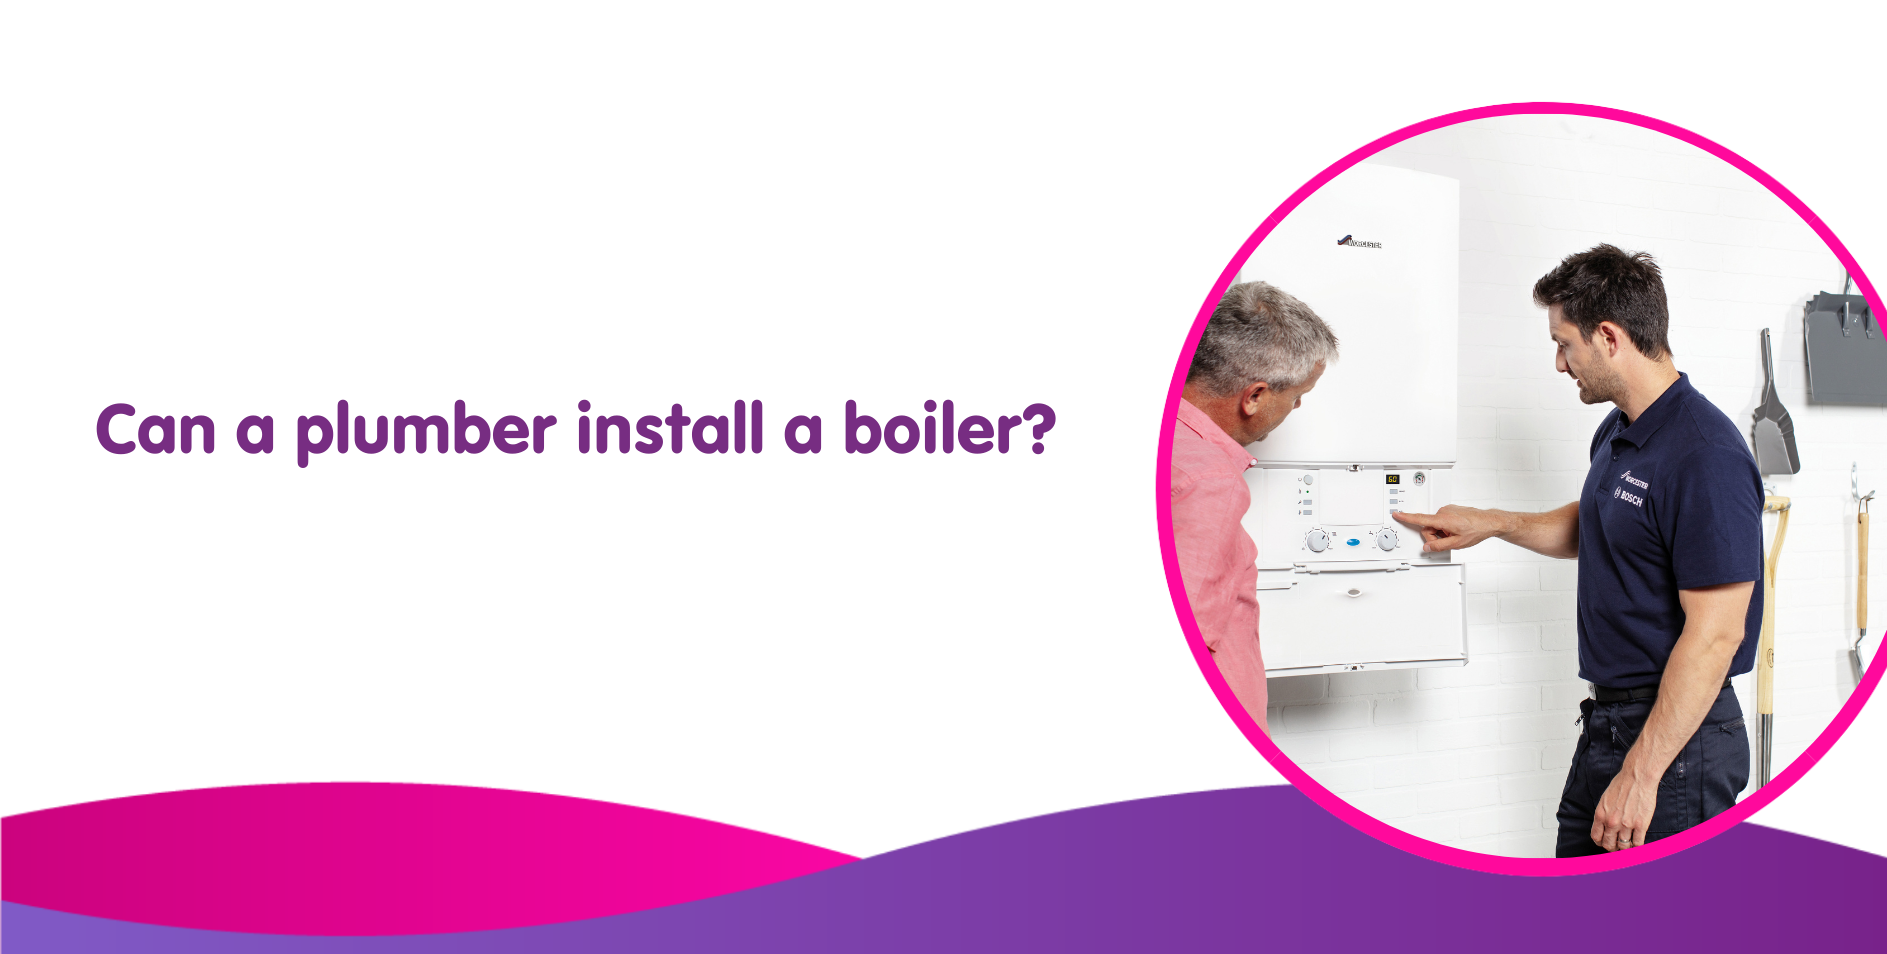 can a plumber install a boiler?